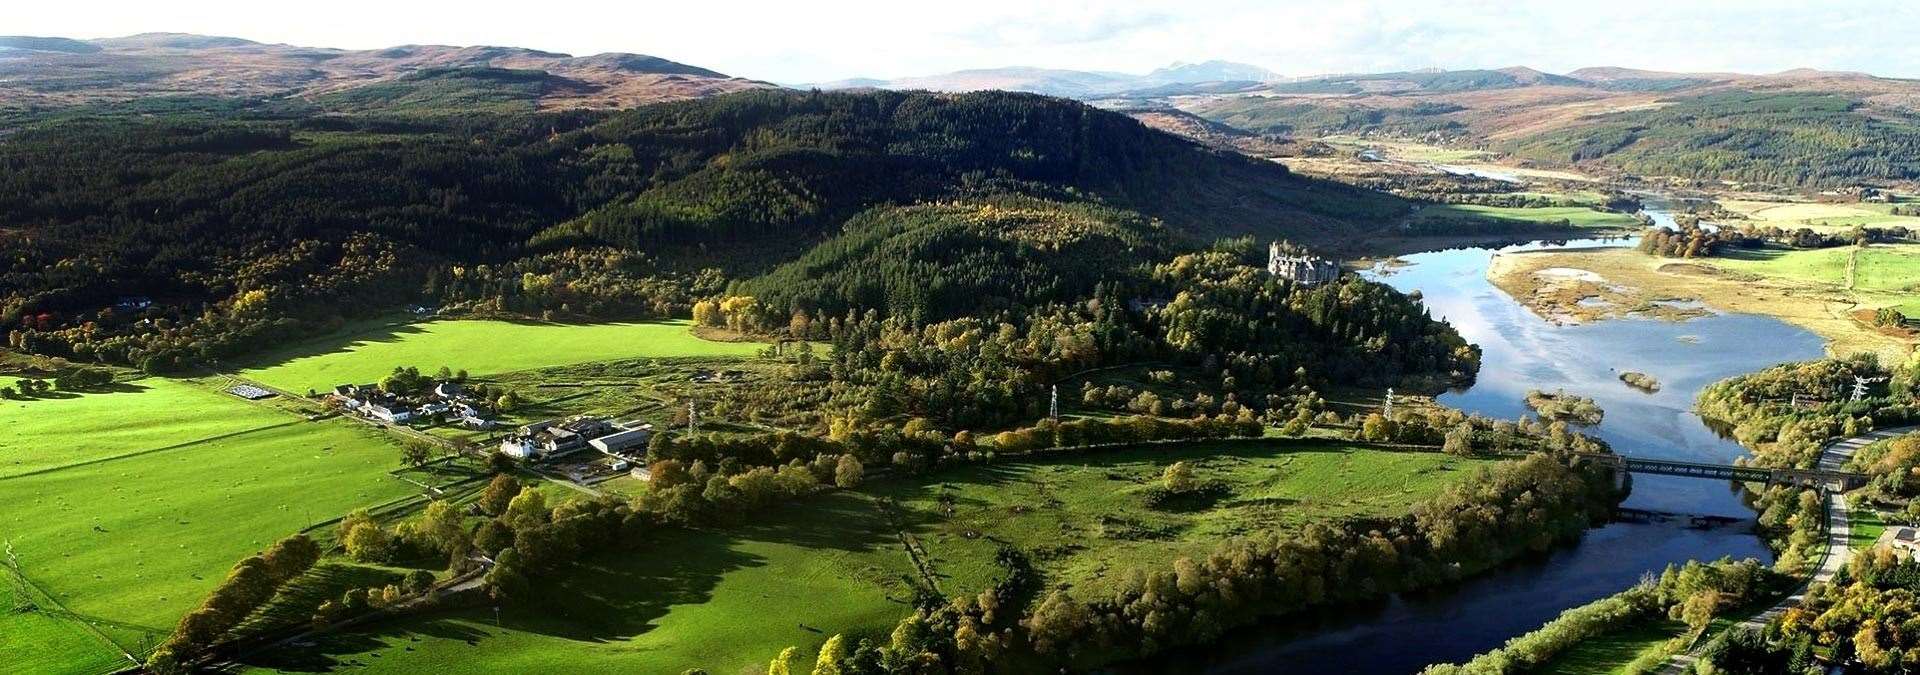 The small community of Culrain sits amidst stunning scenery. Carbisdale Castle can be seen in the background. Picture: Gregor Laing